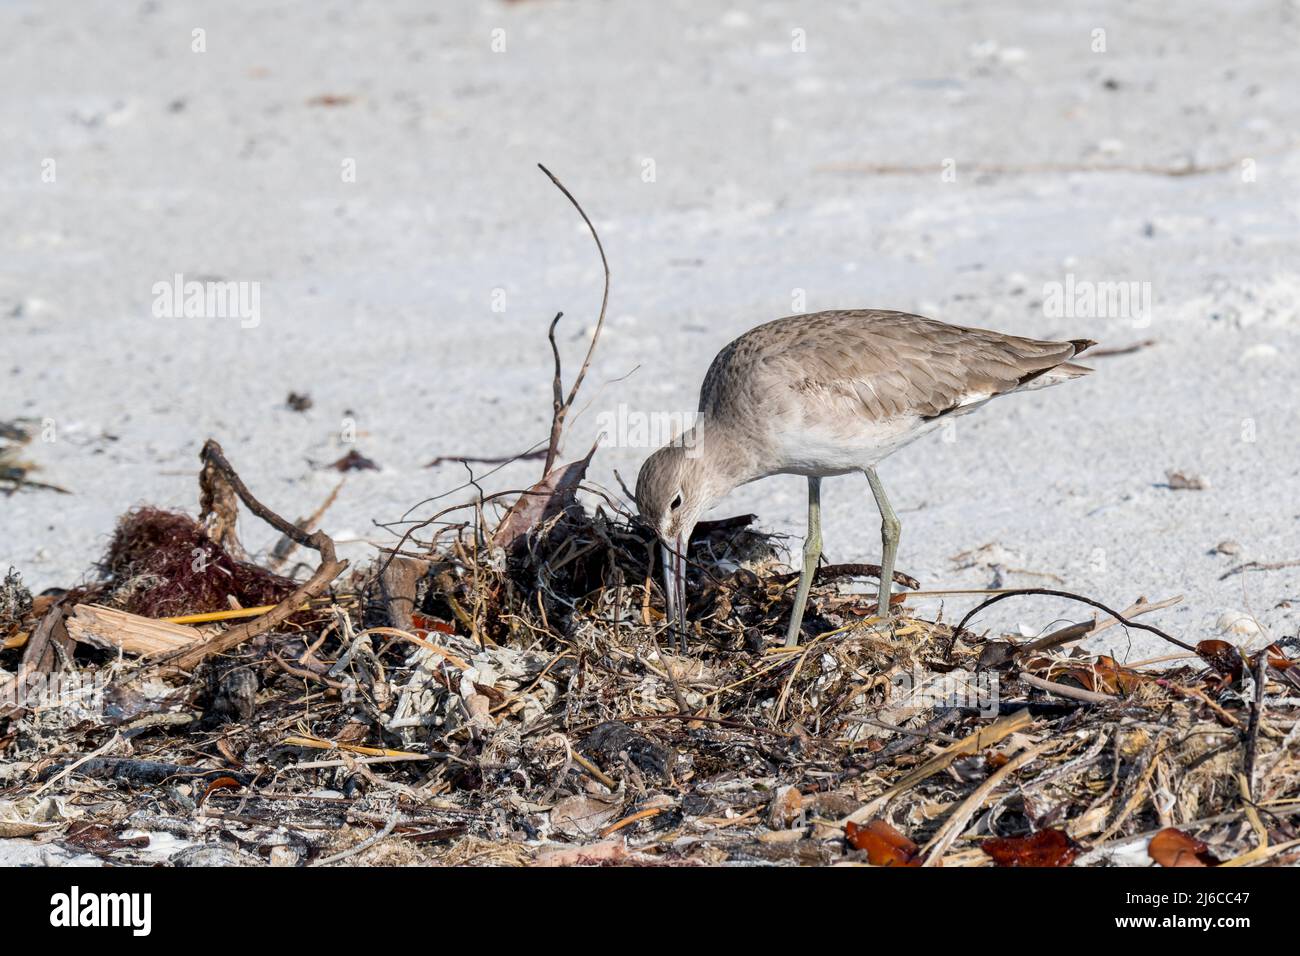 Florida. A Western Willet, (Tringa semipalmata) looking for crabs, worms and invertebrates on Sanibel Island. Stock Photo